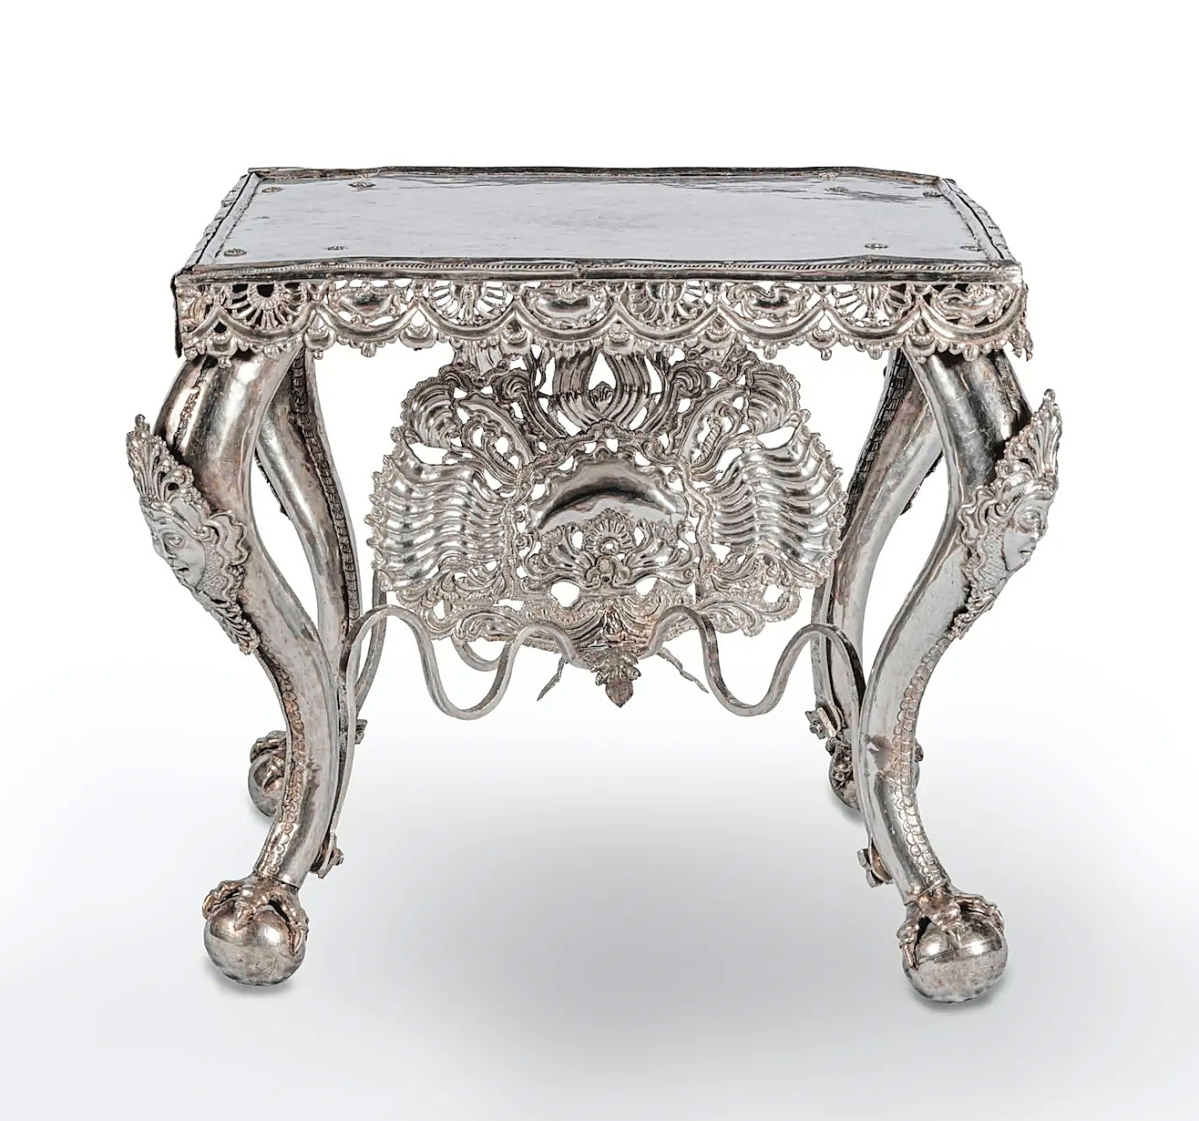 A silver estrado table from Upper Peru,   Eighteenth Century. Cast, hammered,   beaten and chased, 15 inches high.